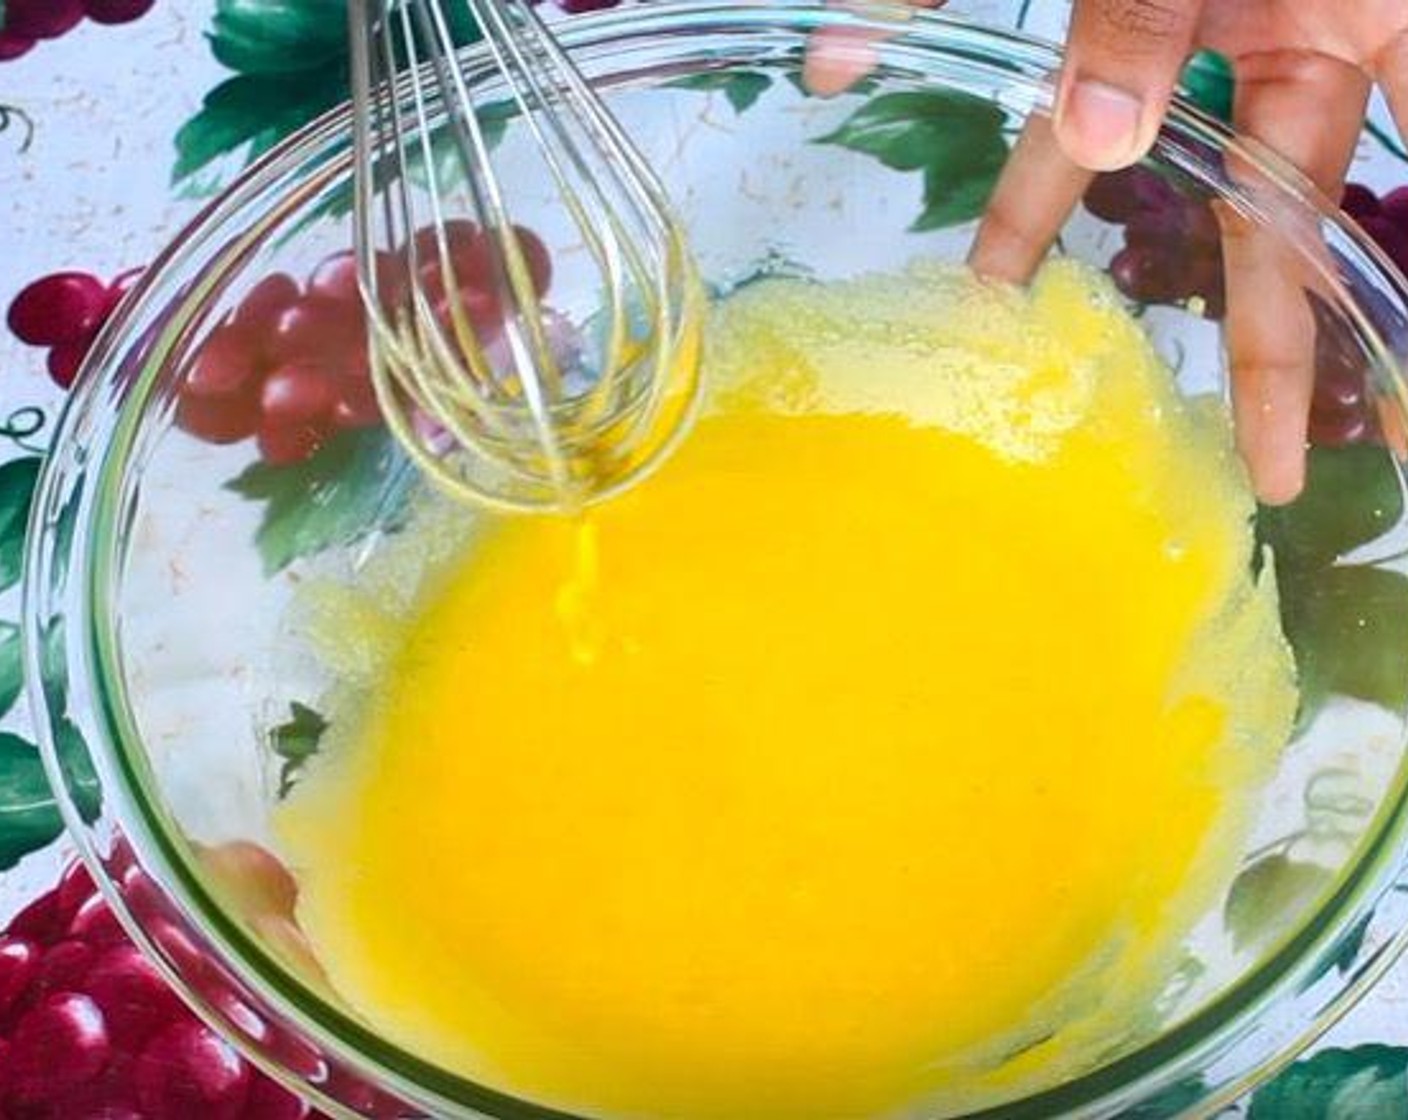 step 2 In a mixing bowl, add Eggs (6) and Caster Sugar (1/2 cup). Whisk together.